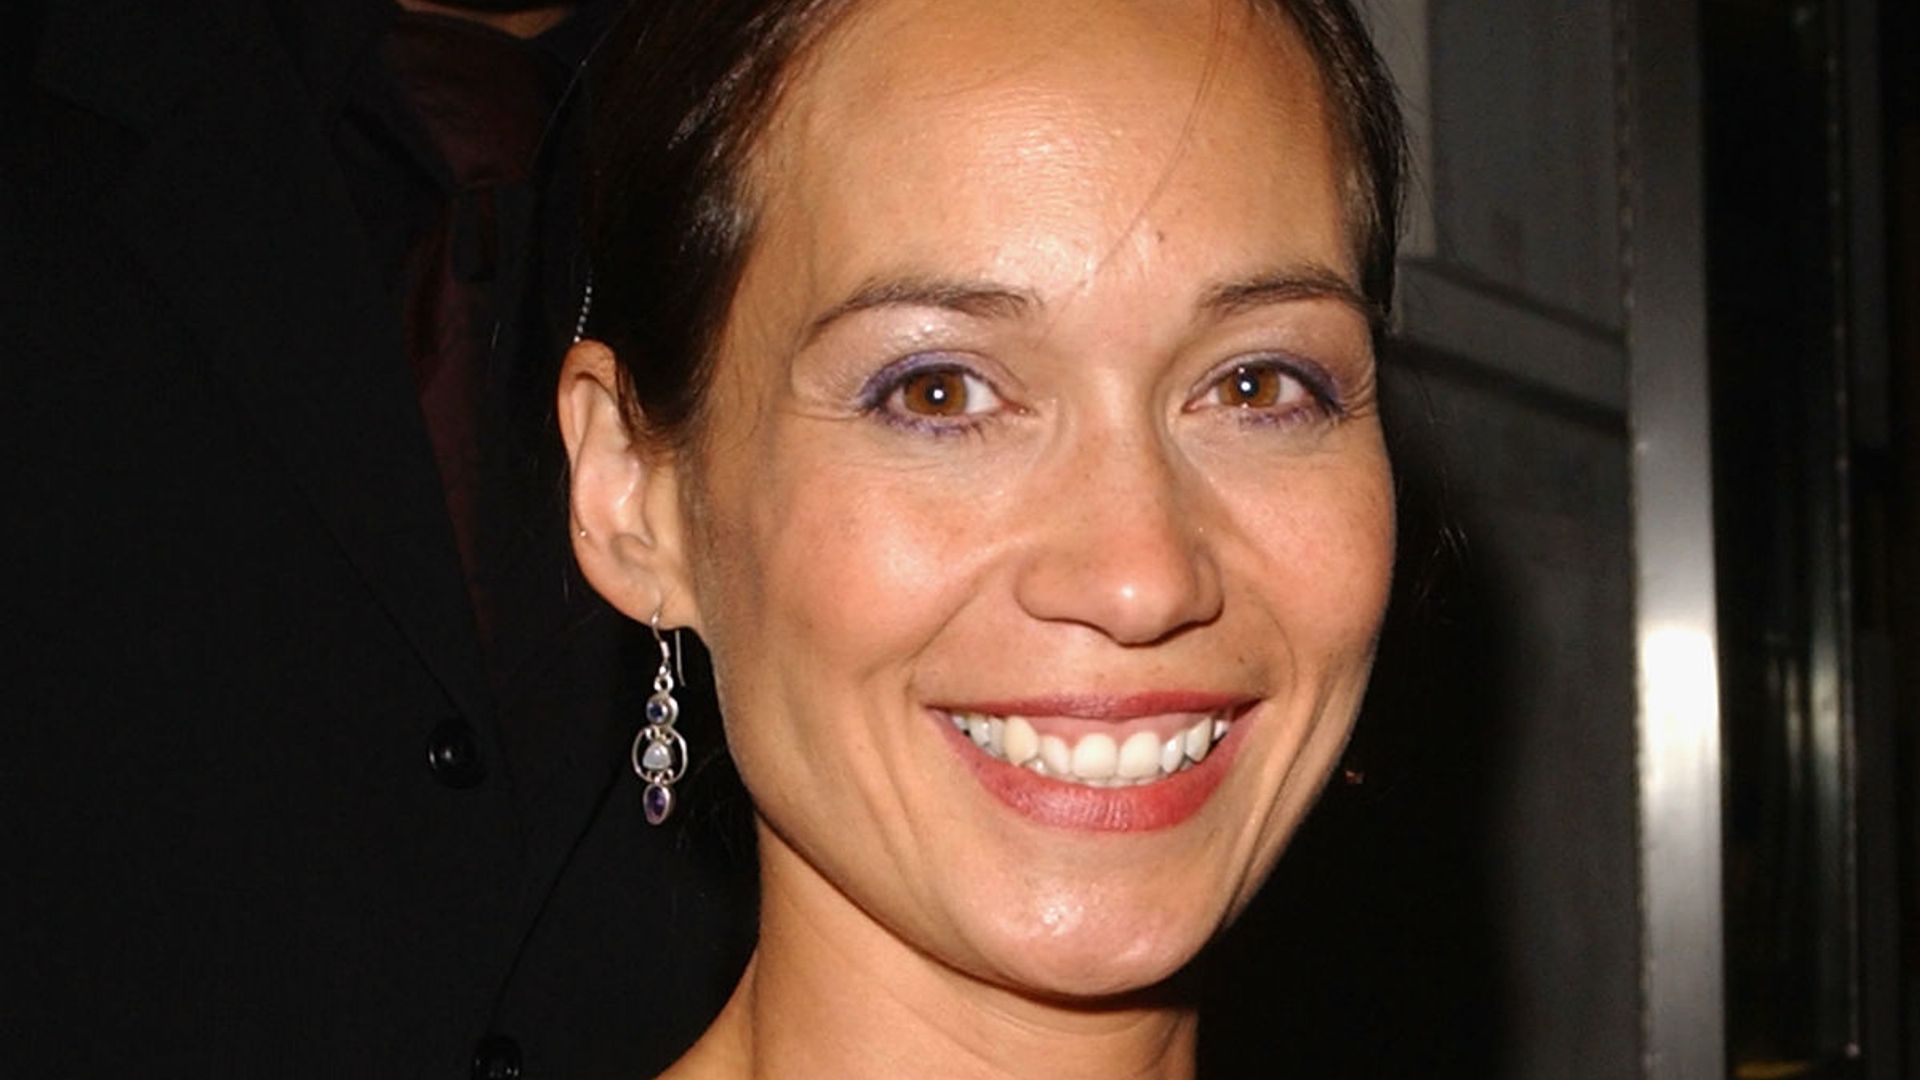 Emmerdale's Leah Bracknell reveals new work project amid her cancer battle